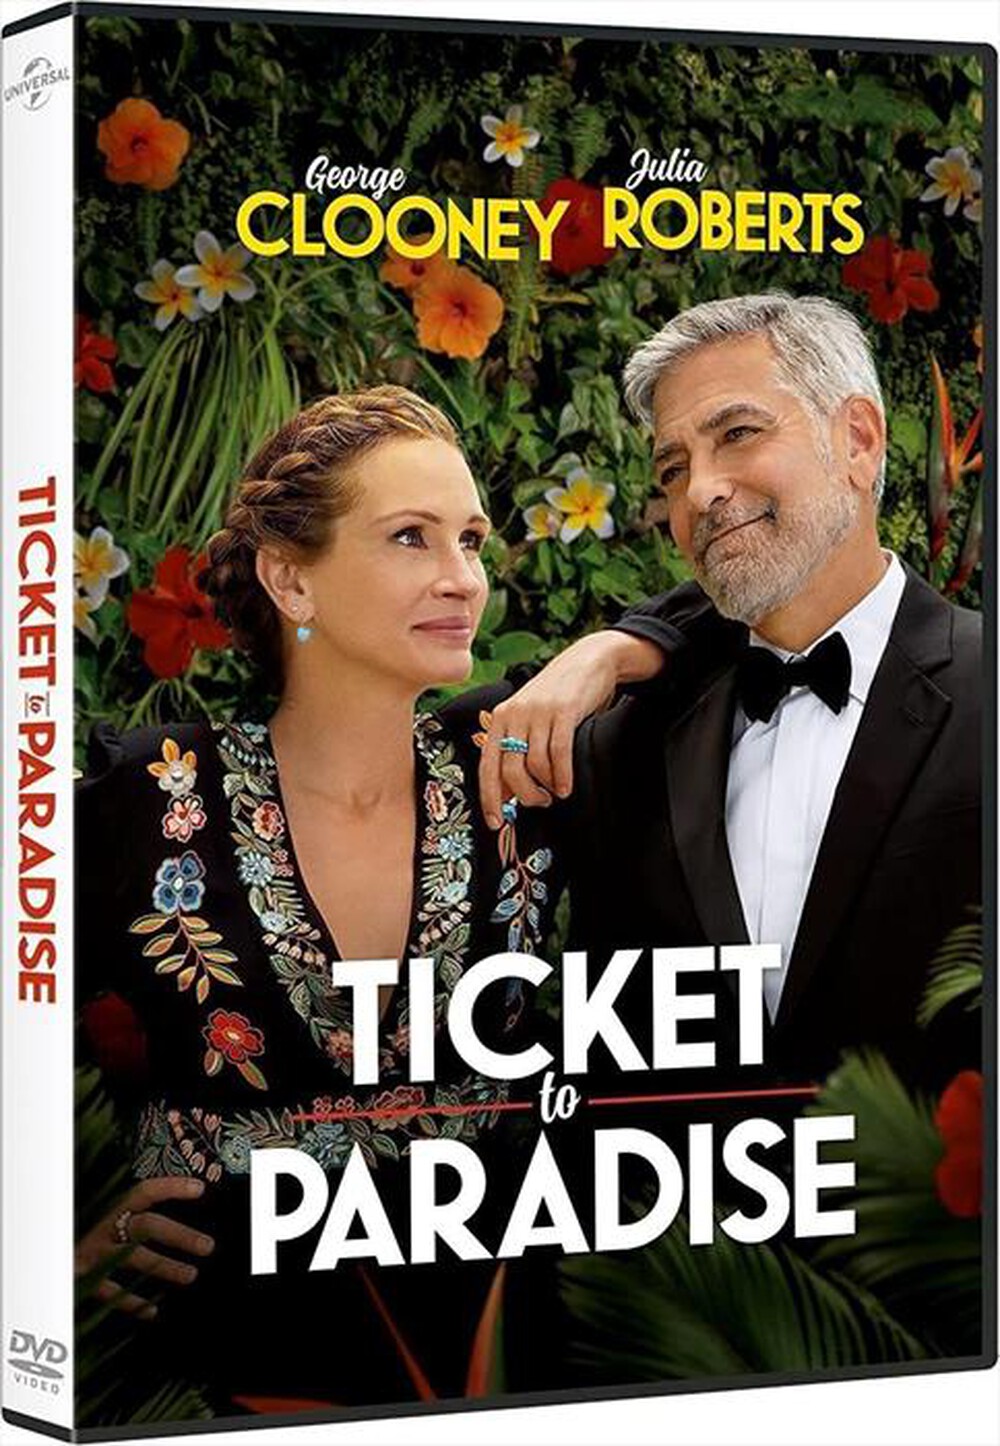 "UNIVERSAL PICTURES - Ticket To Paradise"